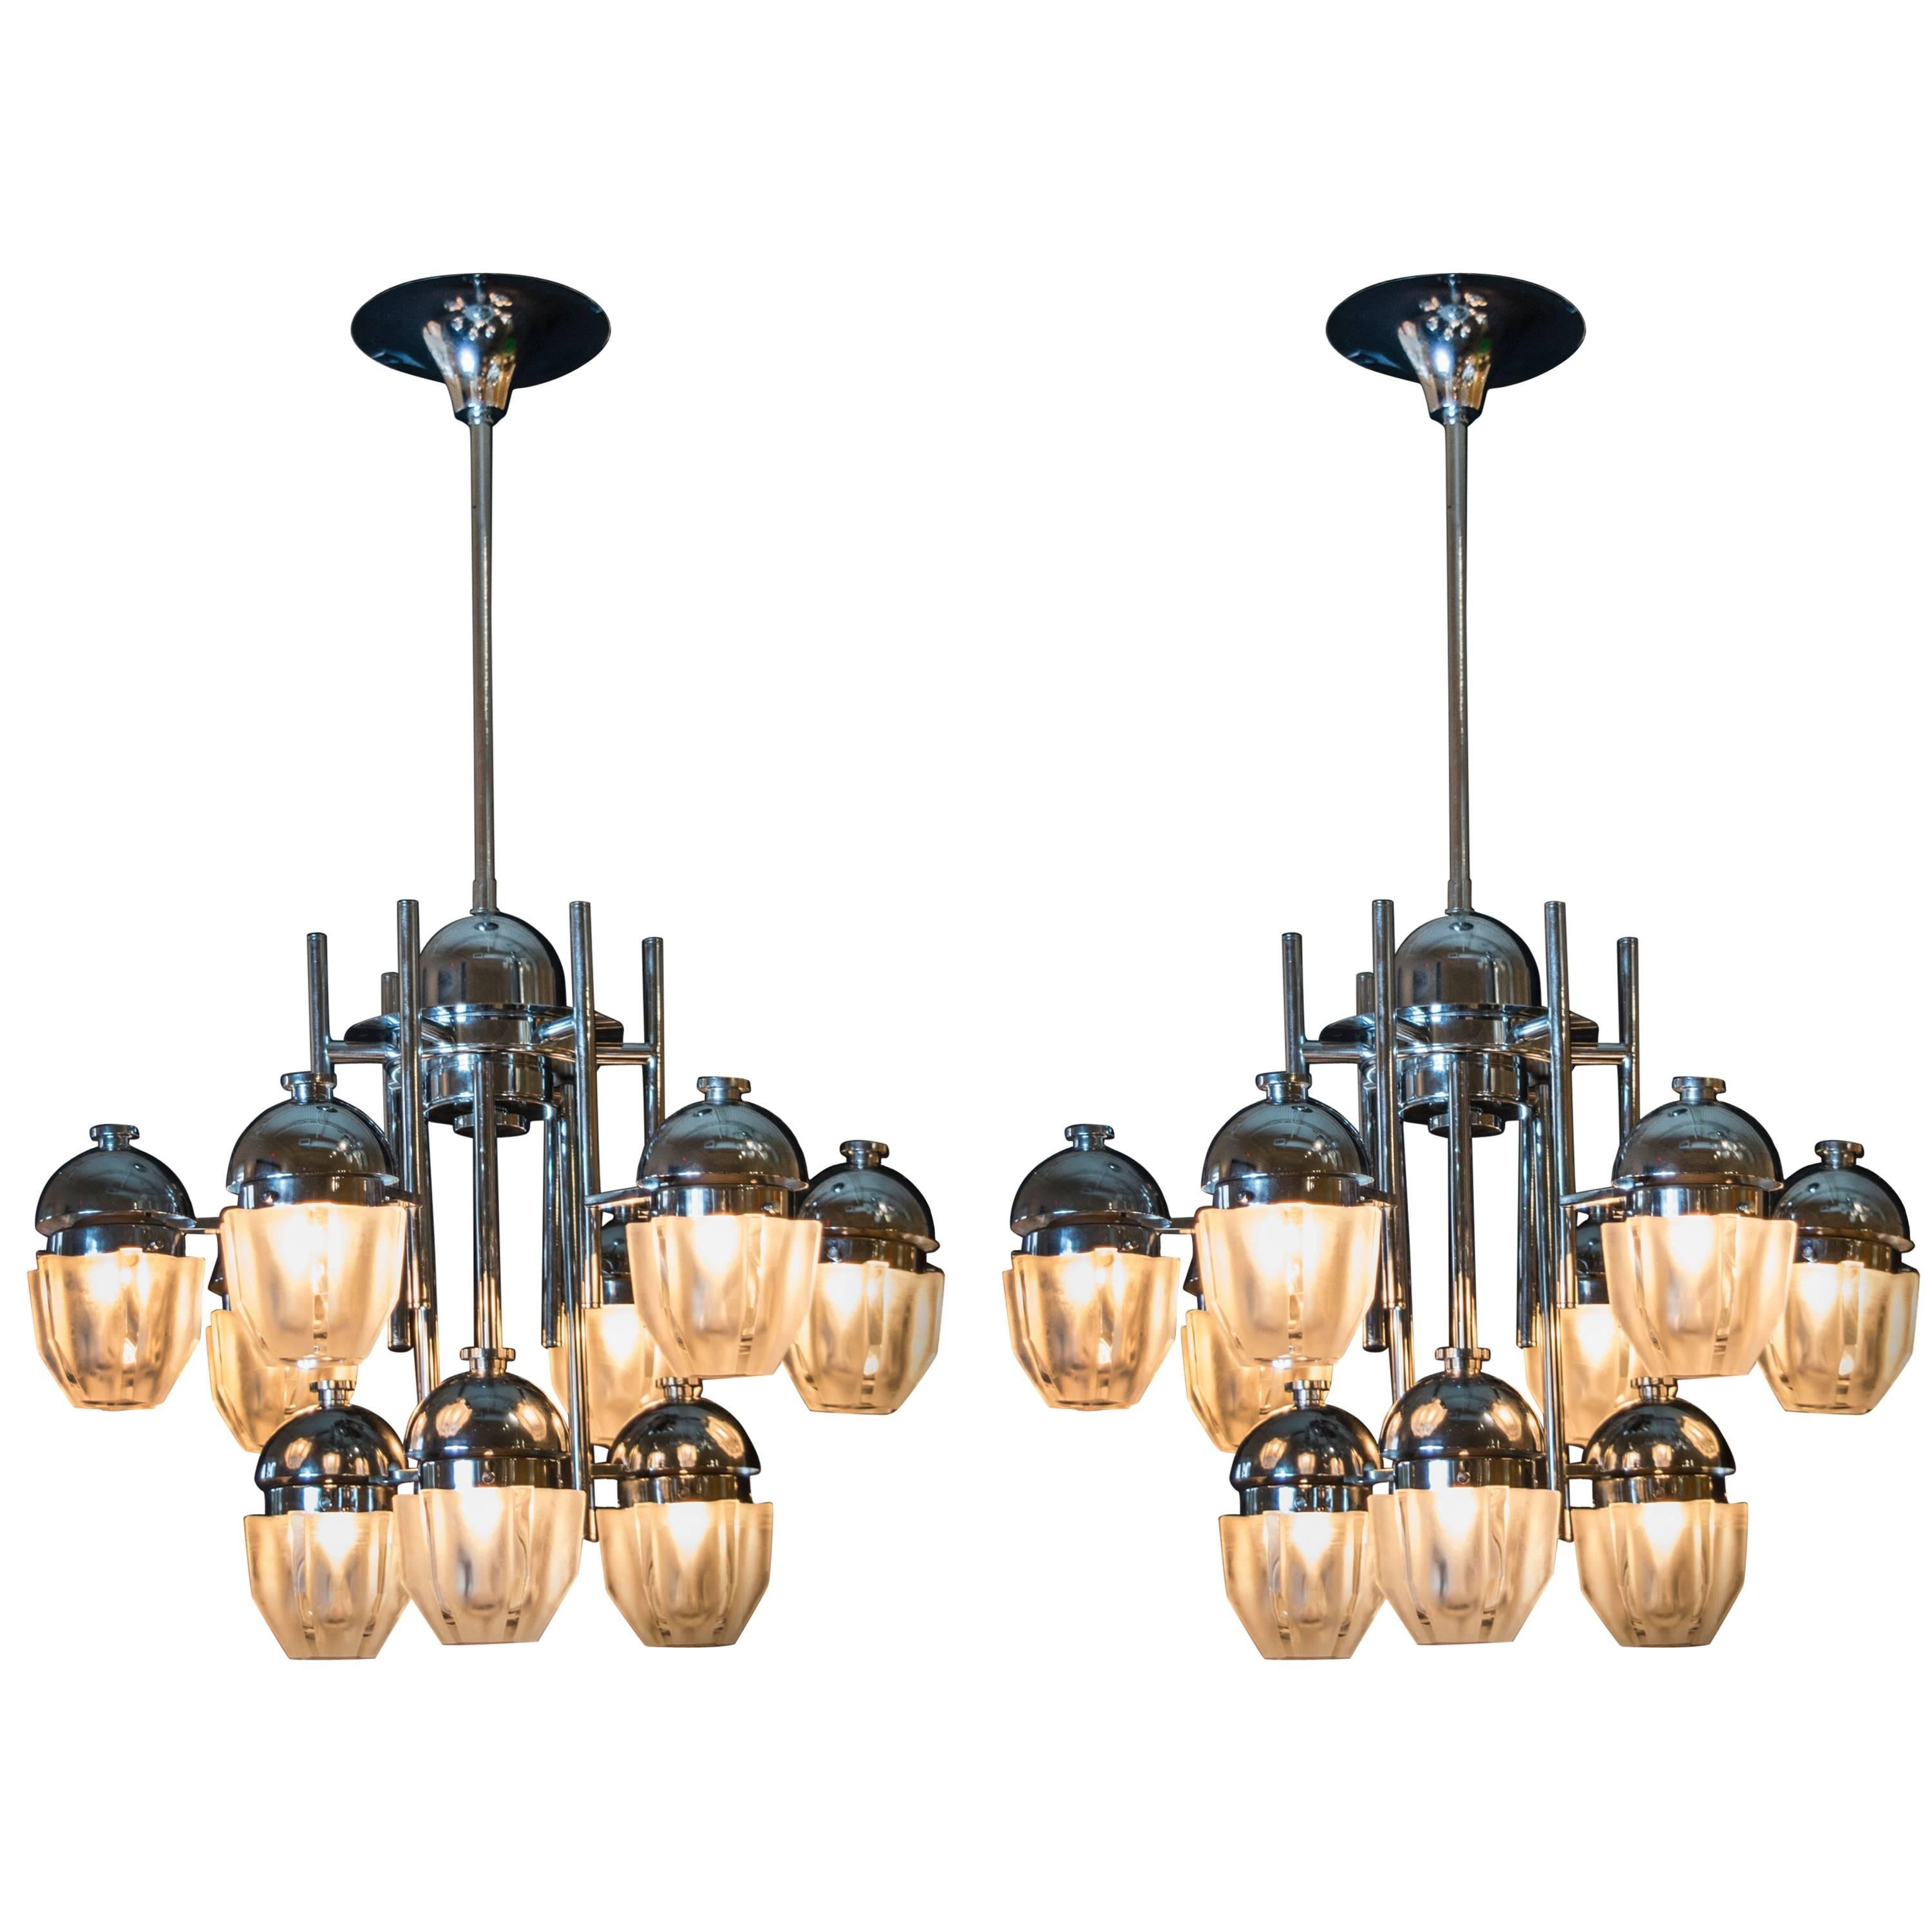 Pair of Chrome Sciolari Chandeliers with Nine Lights For Sale